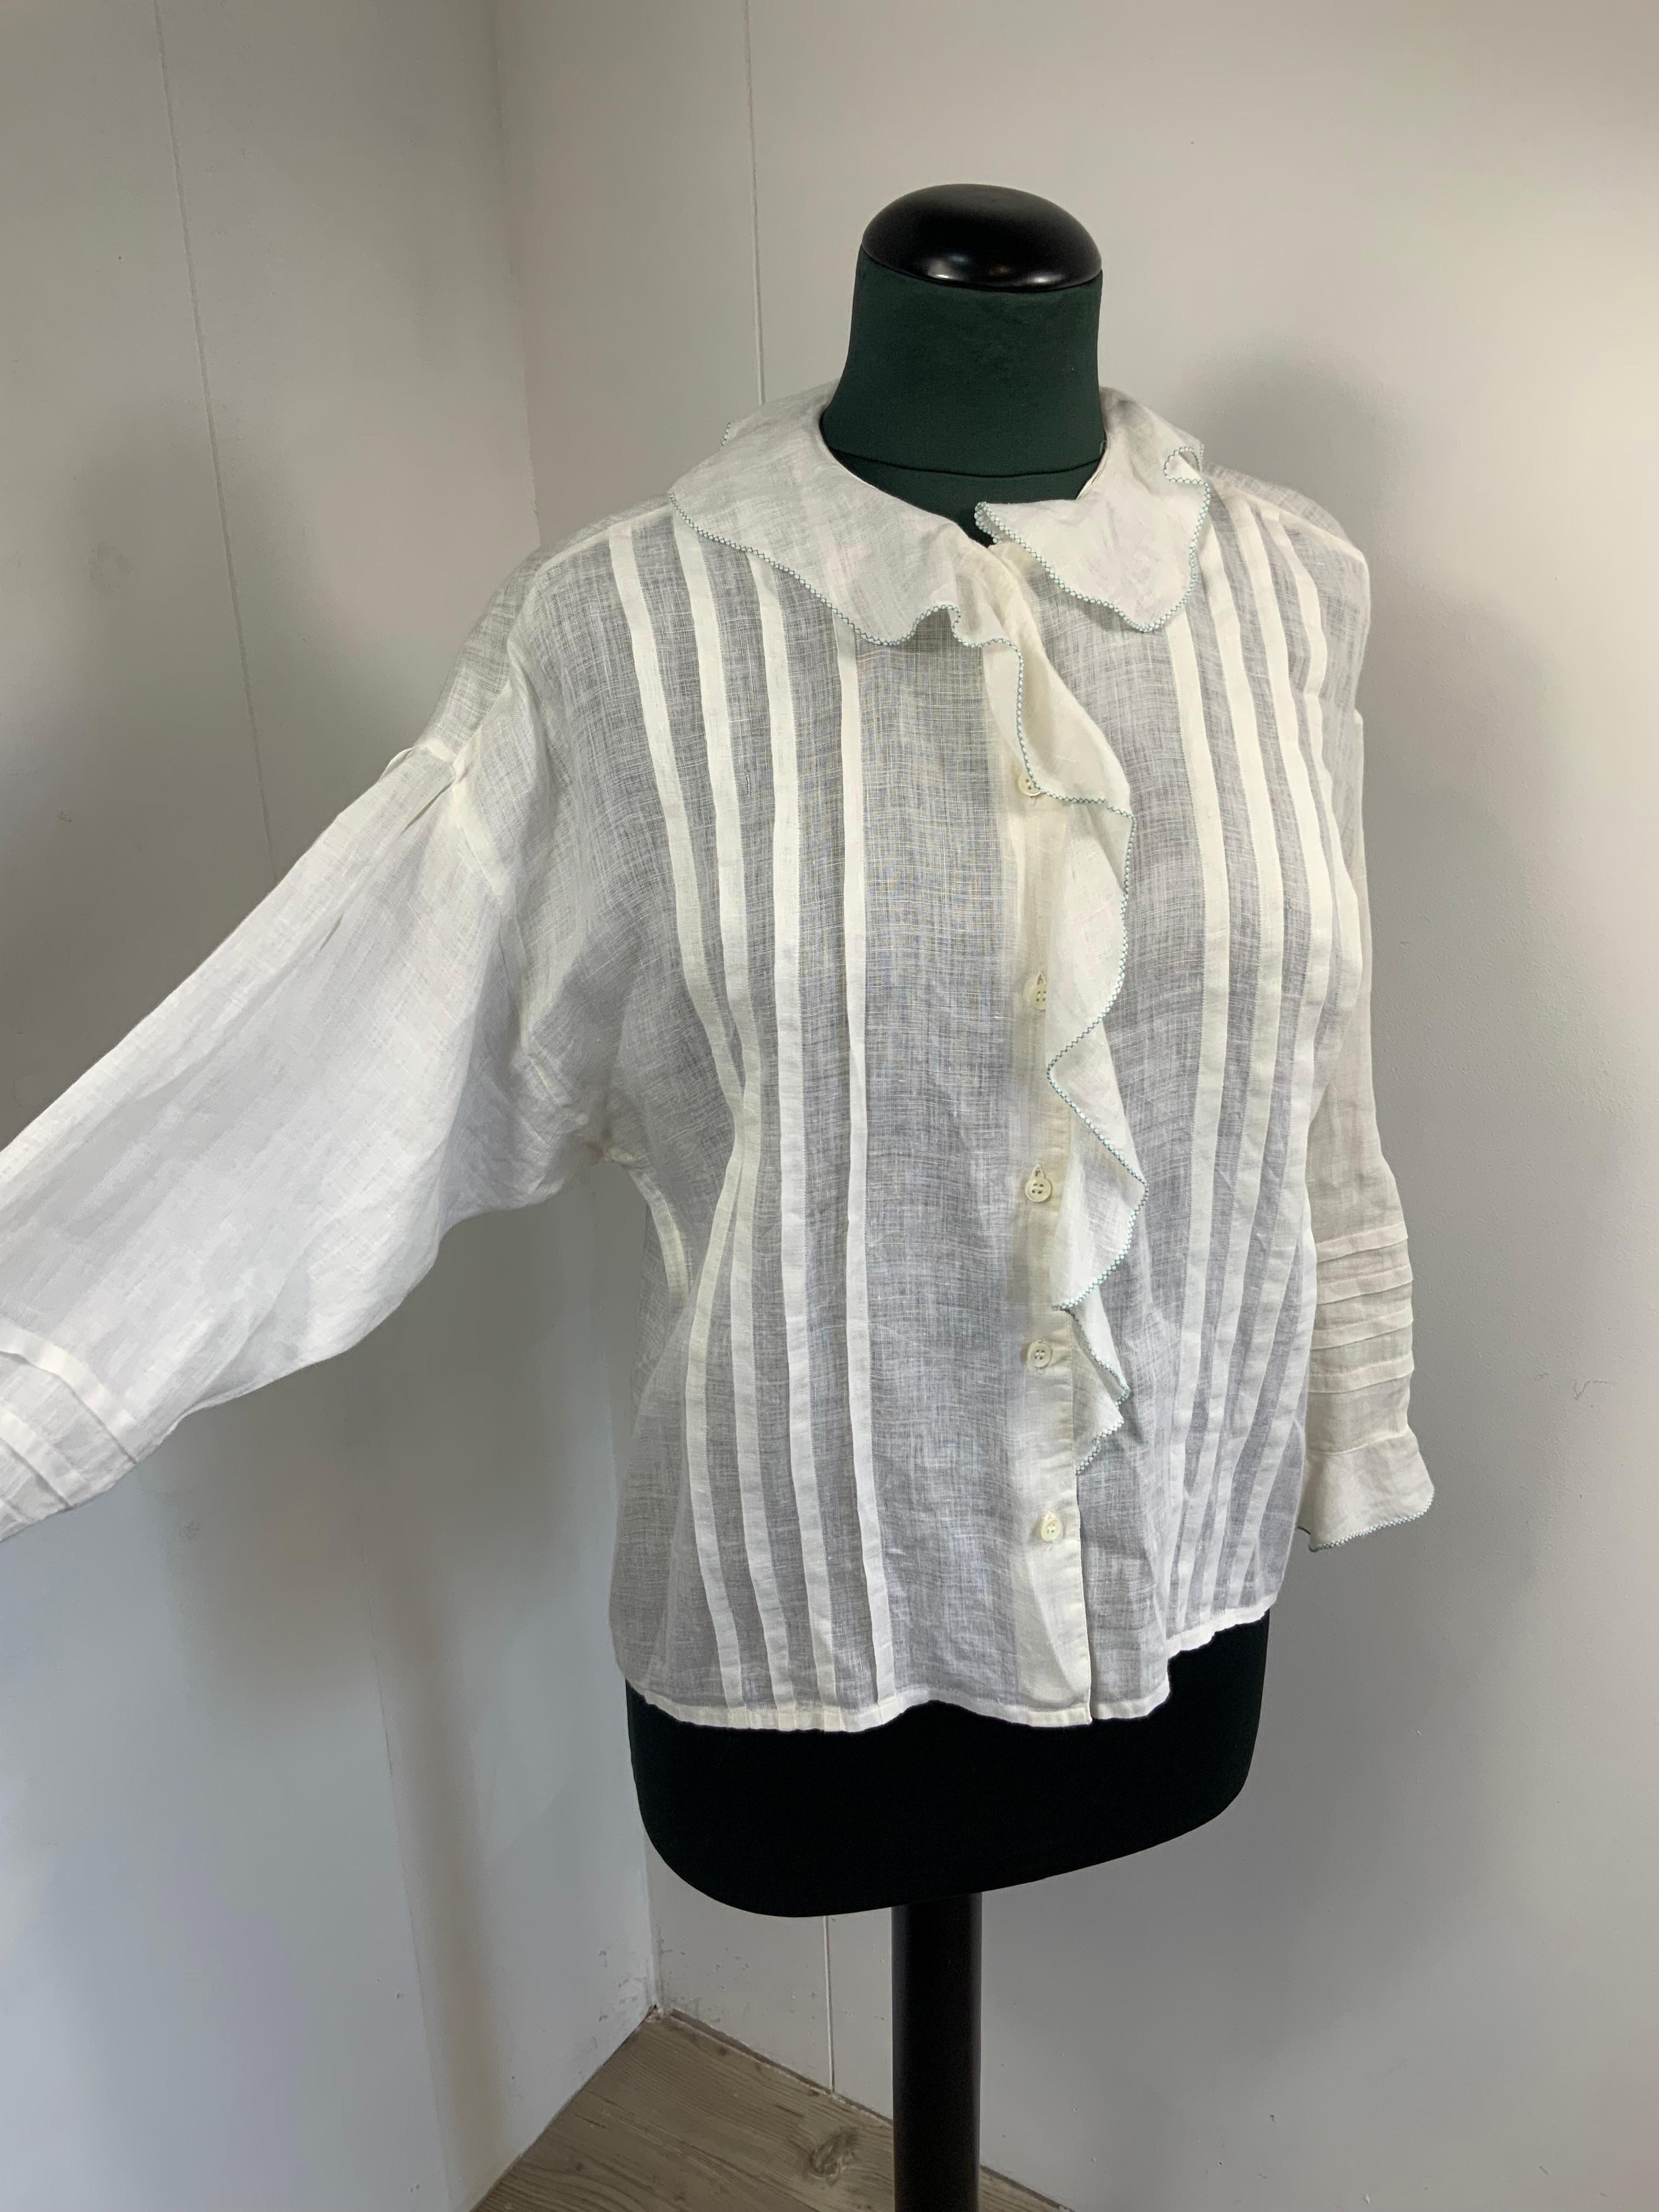 GUCCI VINTAGE LINEN SHIRT 
Vintage garment. About 60 years.
In linen. Perfect for the coming summer.
It lacks size label but dresses more sizes. 40/44 Italian.
Features low shoulder 
Shoulders 52 cm
Bust 52 cm
Length 57
Sleeve 43
Excellent general